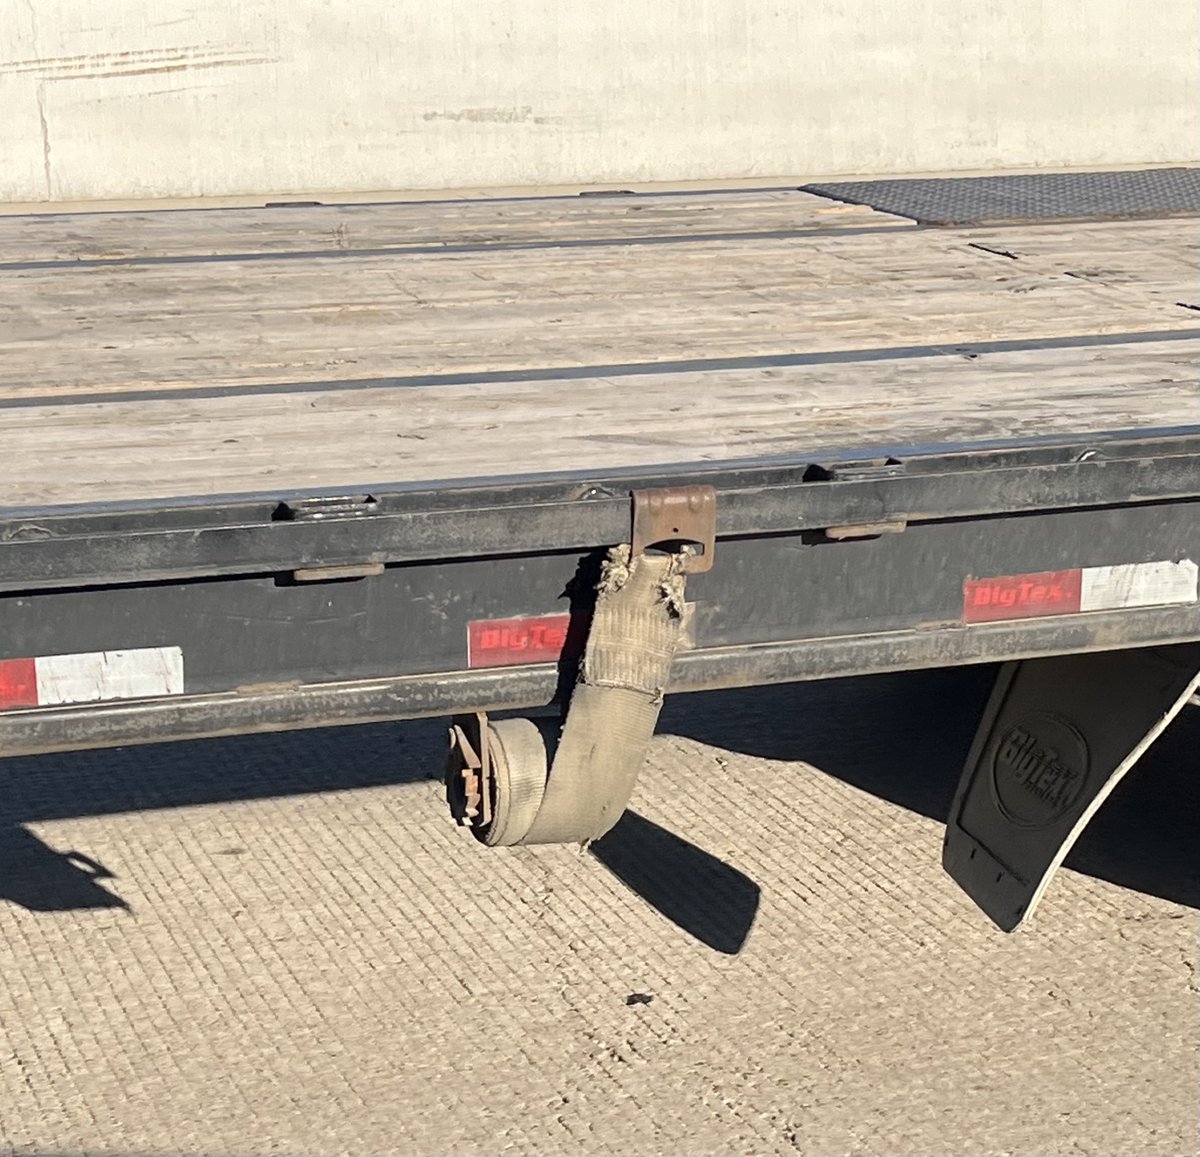 Not in use, however if it was, would not trust it & it could potentially be #OOS depending on how it was used.  

Someone please put this J Hook out of service and allow it to retire.

#JHookMercy #StrapRetirement #LoadSecurement #UnsecuredLoad #FrayedStrap #OutOfService #NotSafe